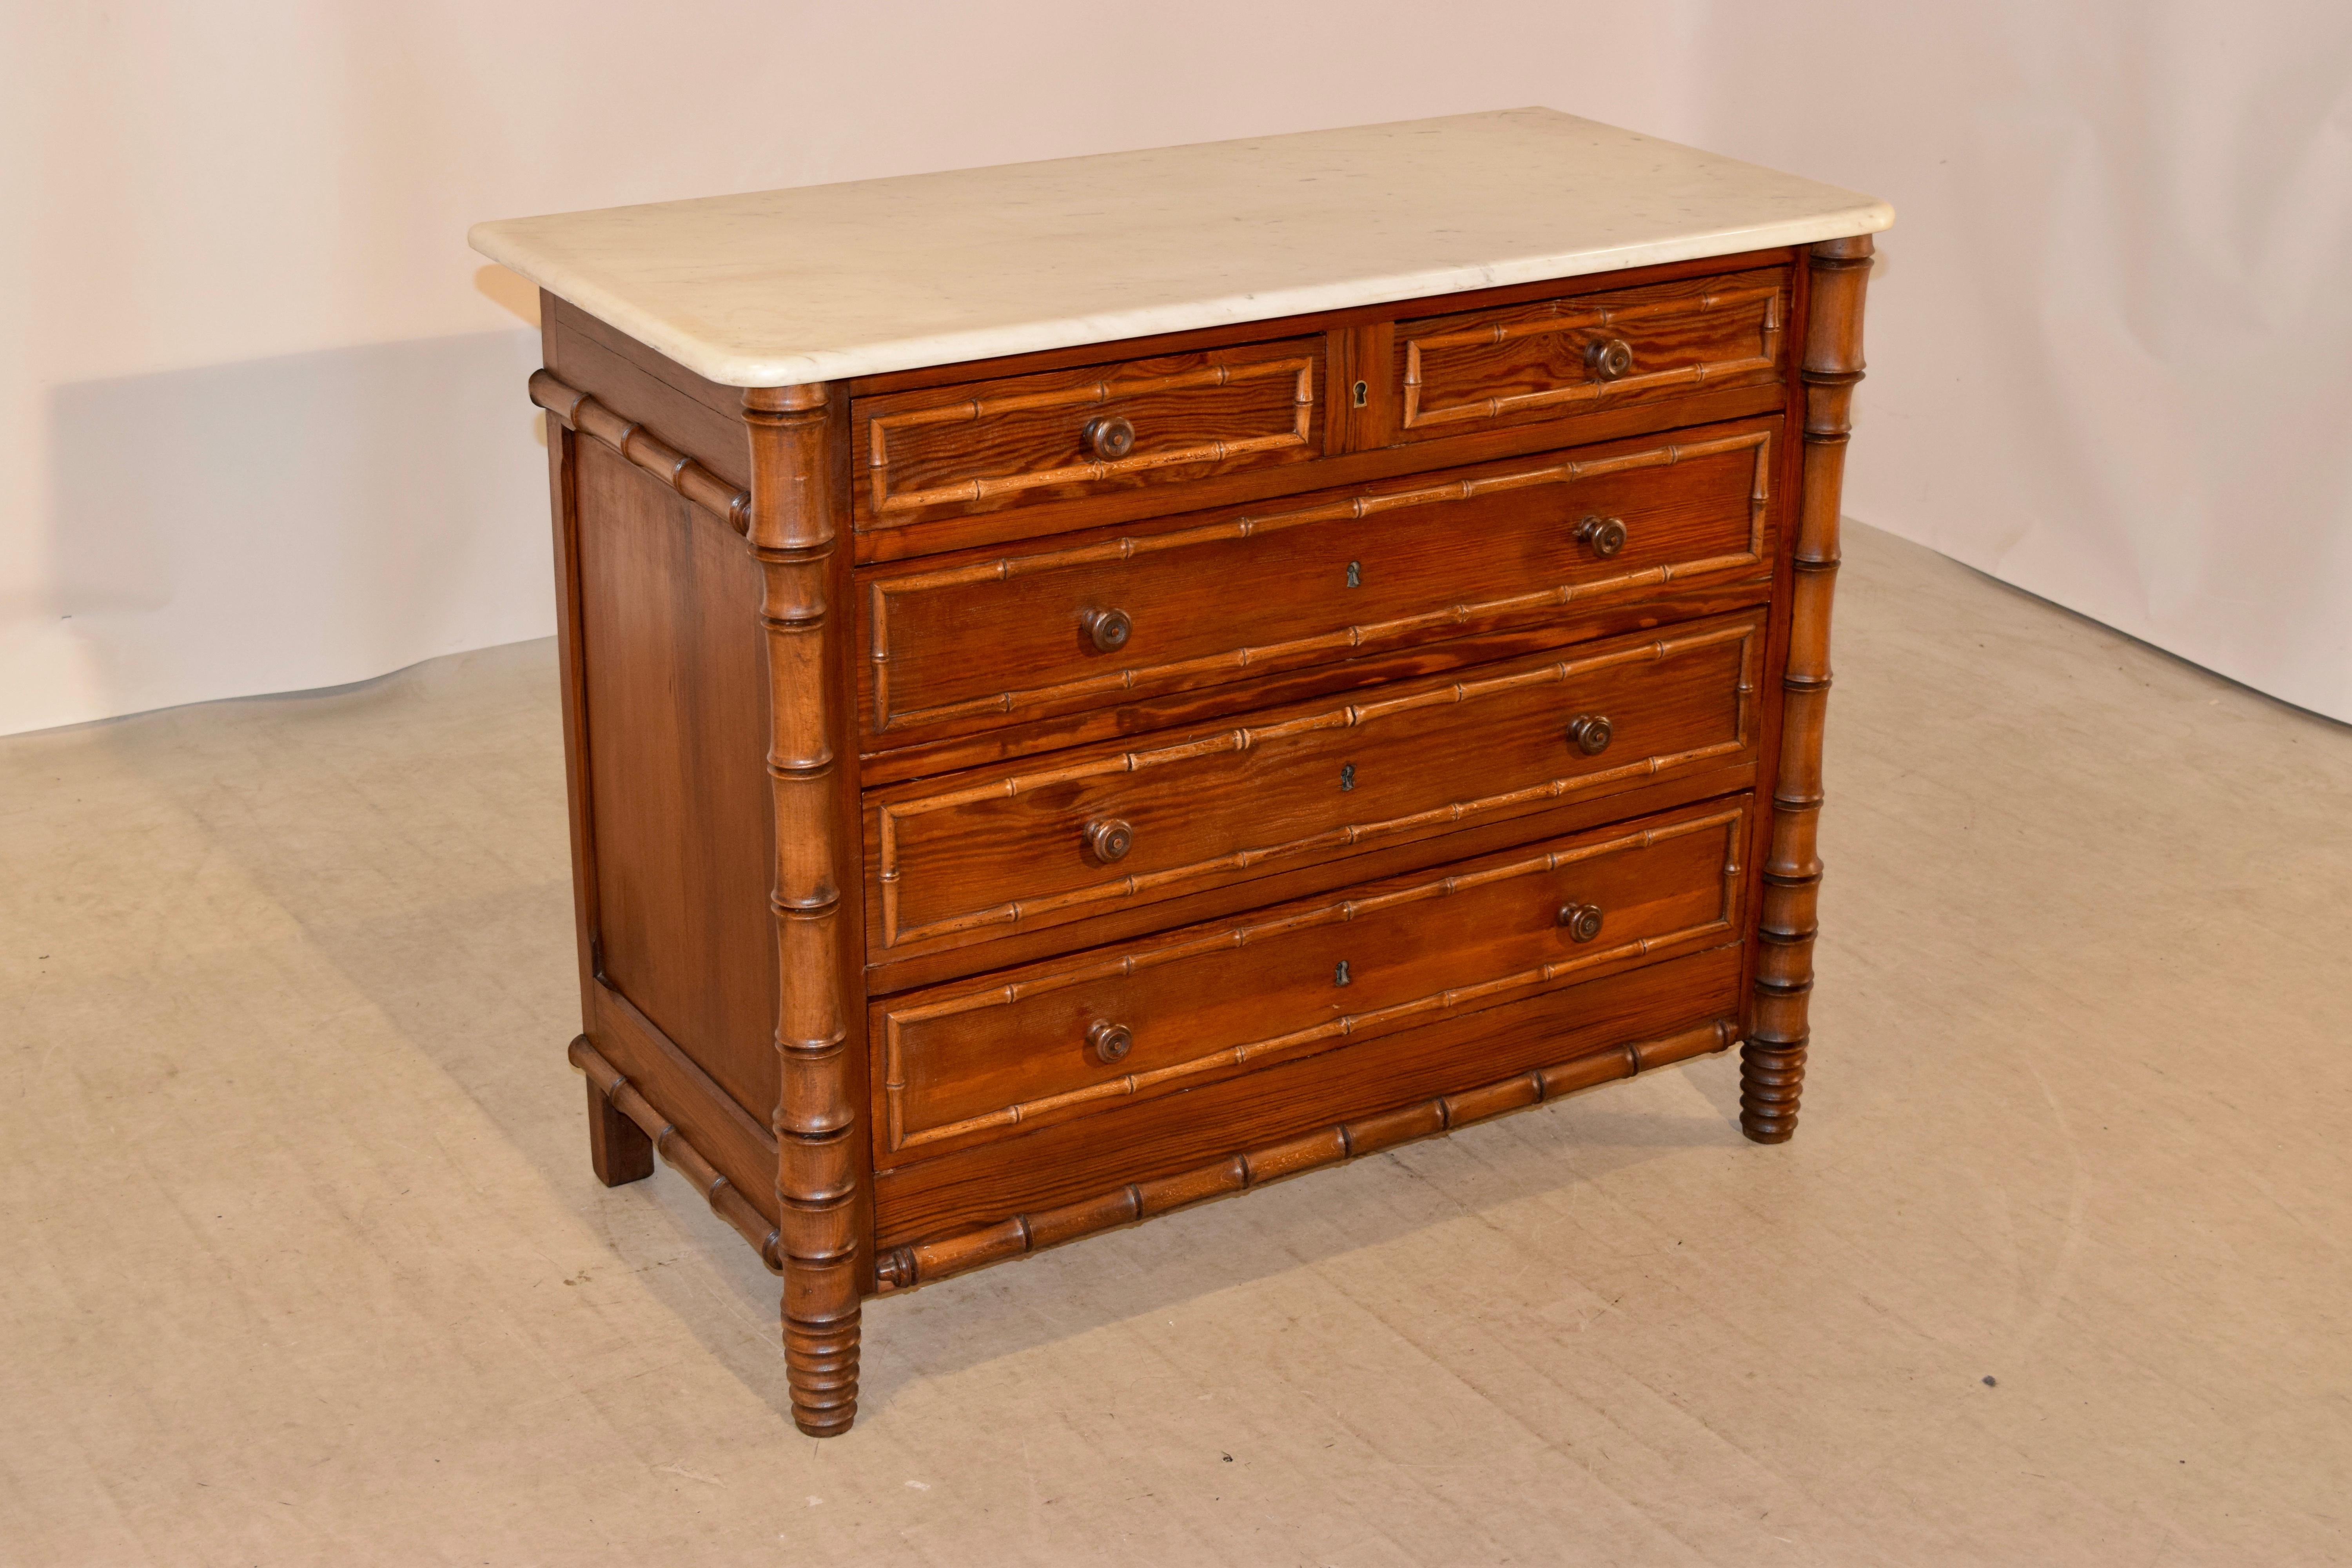 19th century faux bamboo chest of drawers from France with the original marble top, which has normal staining from age and use. The case has two drawers over three drawers, all banded with faux bamboo molding and flanked by faux bamboo hand turned